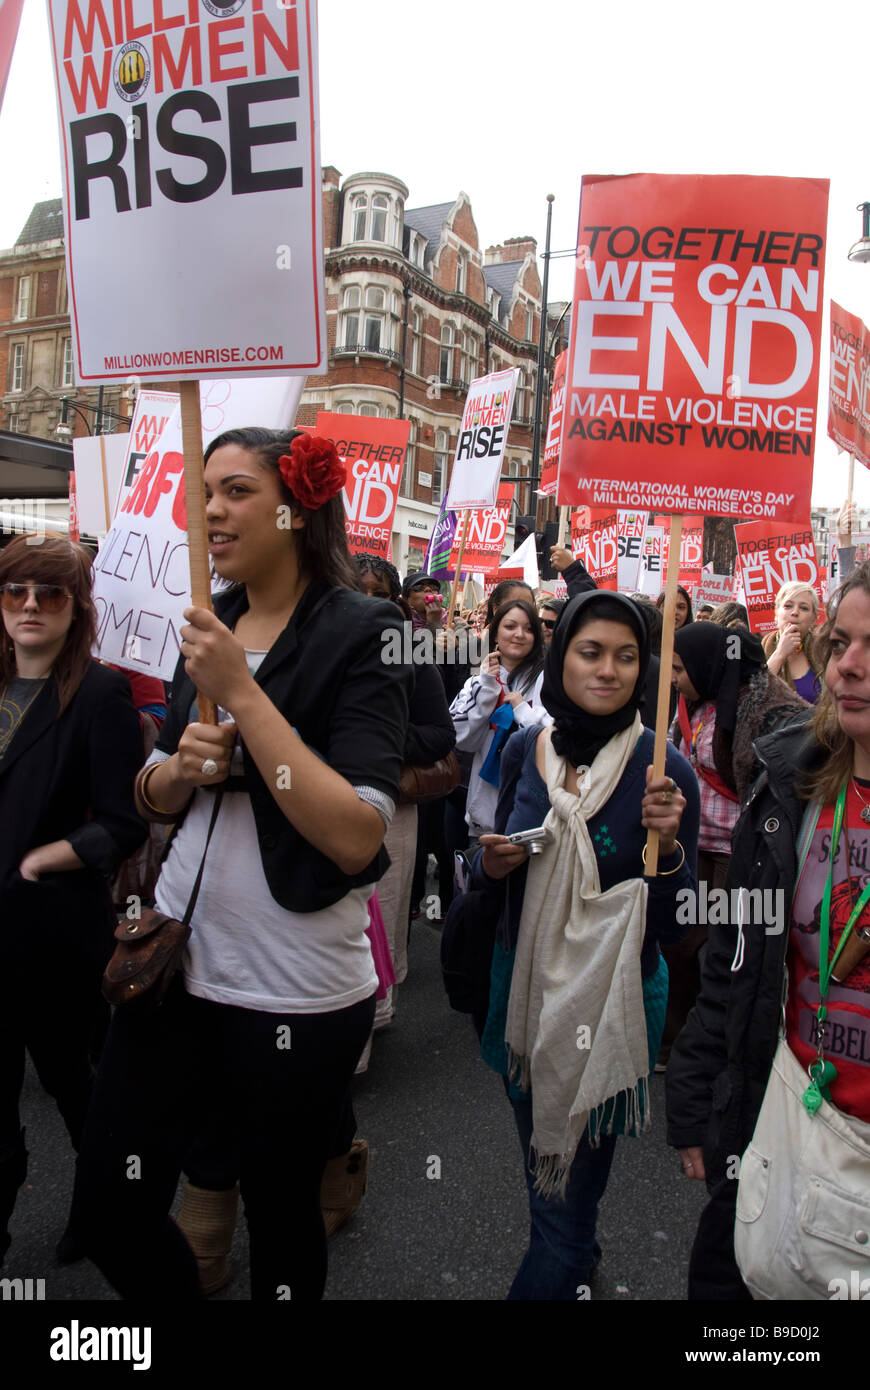 Women's protest through central London against domestic violence Stock Photo